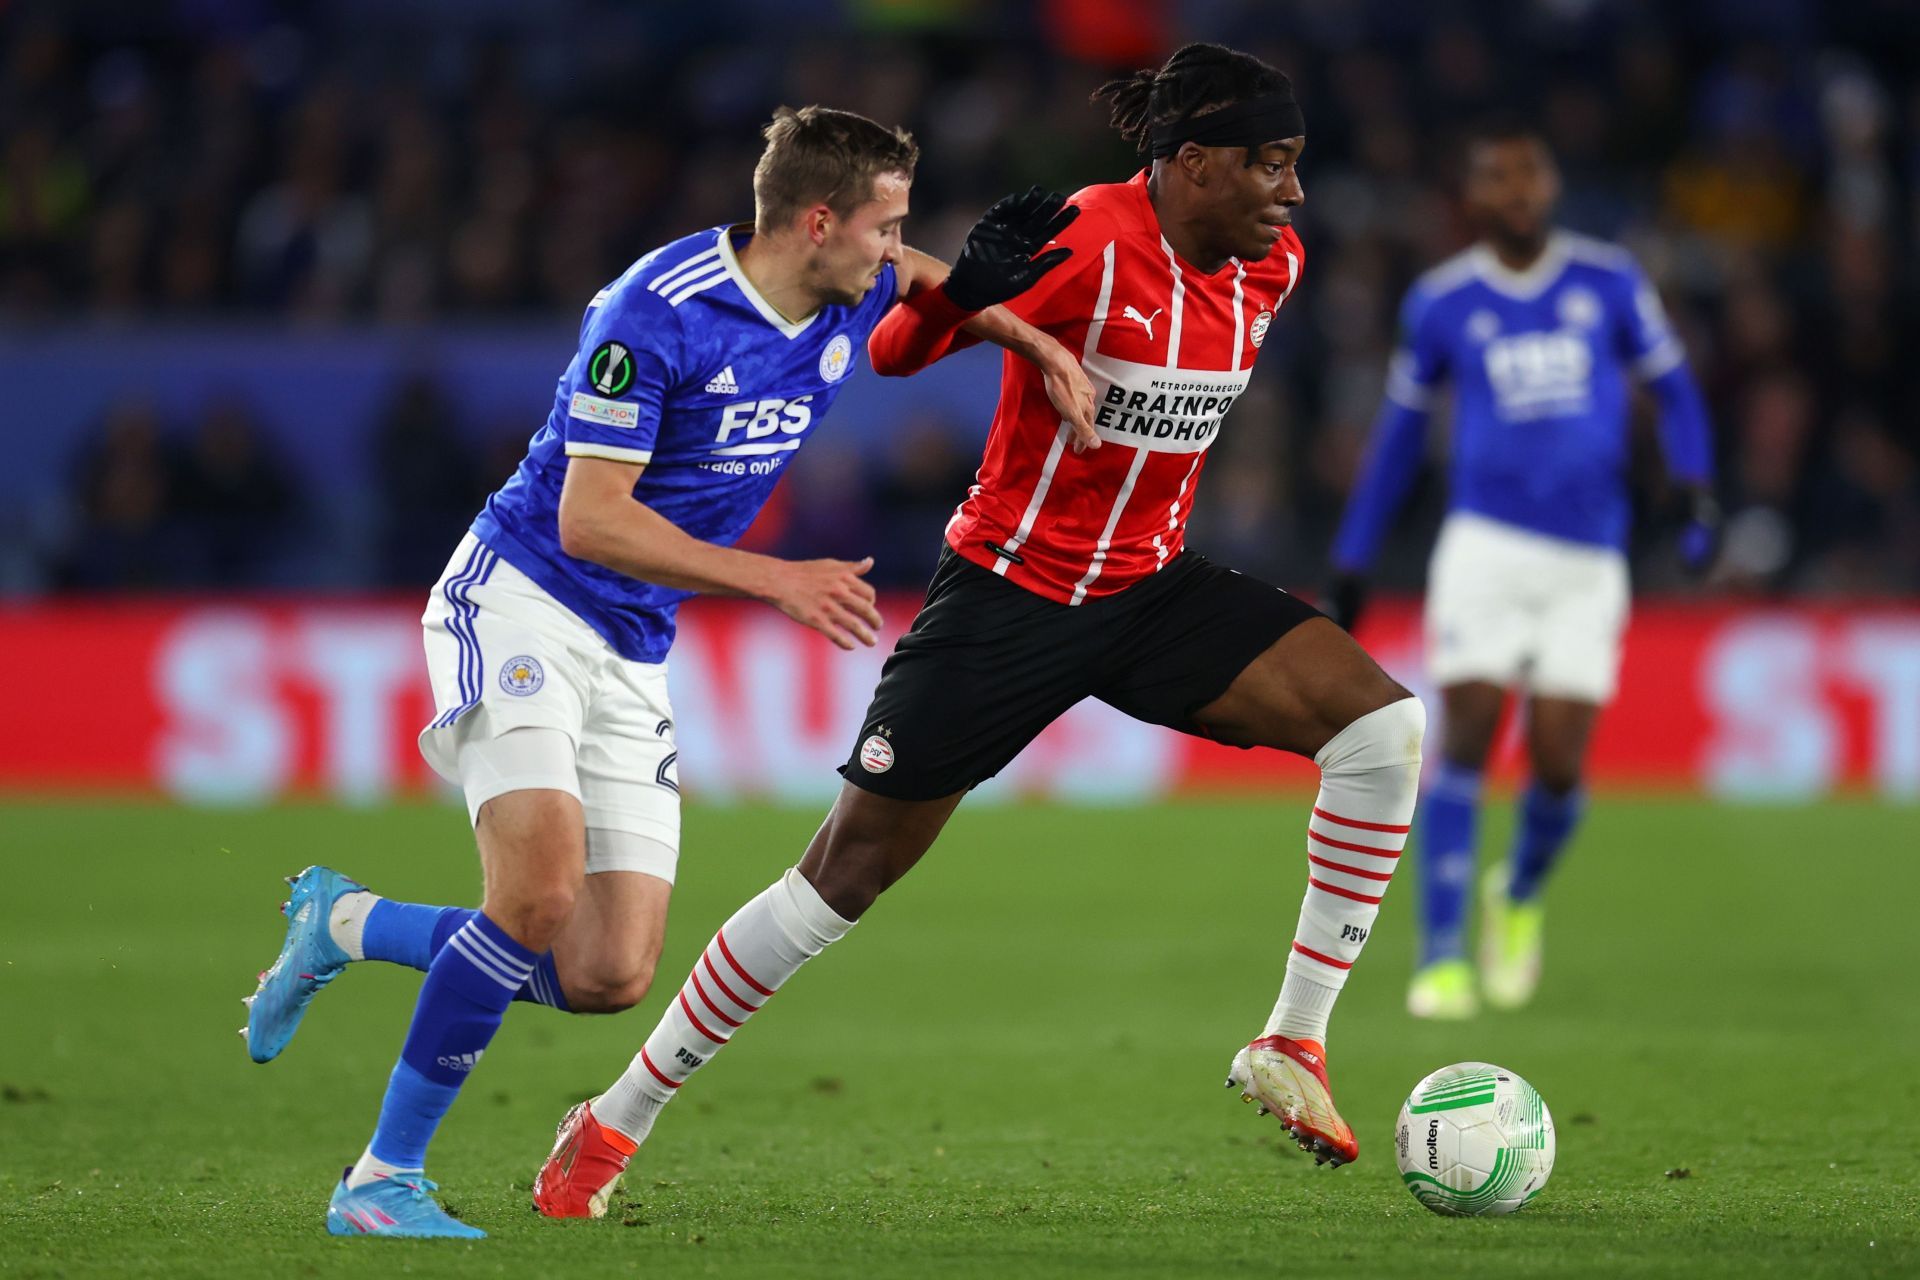 Madueke is an exciting winger who plays for PSV Eindhoven